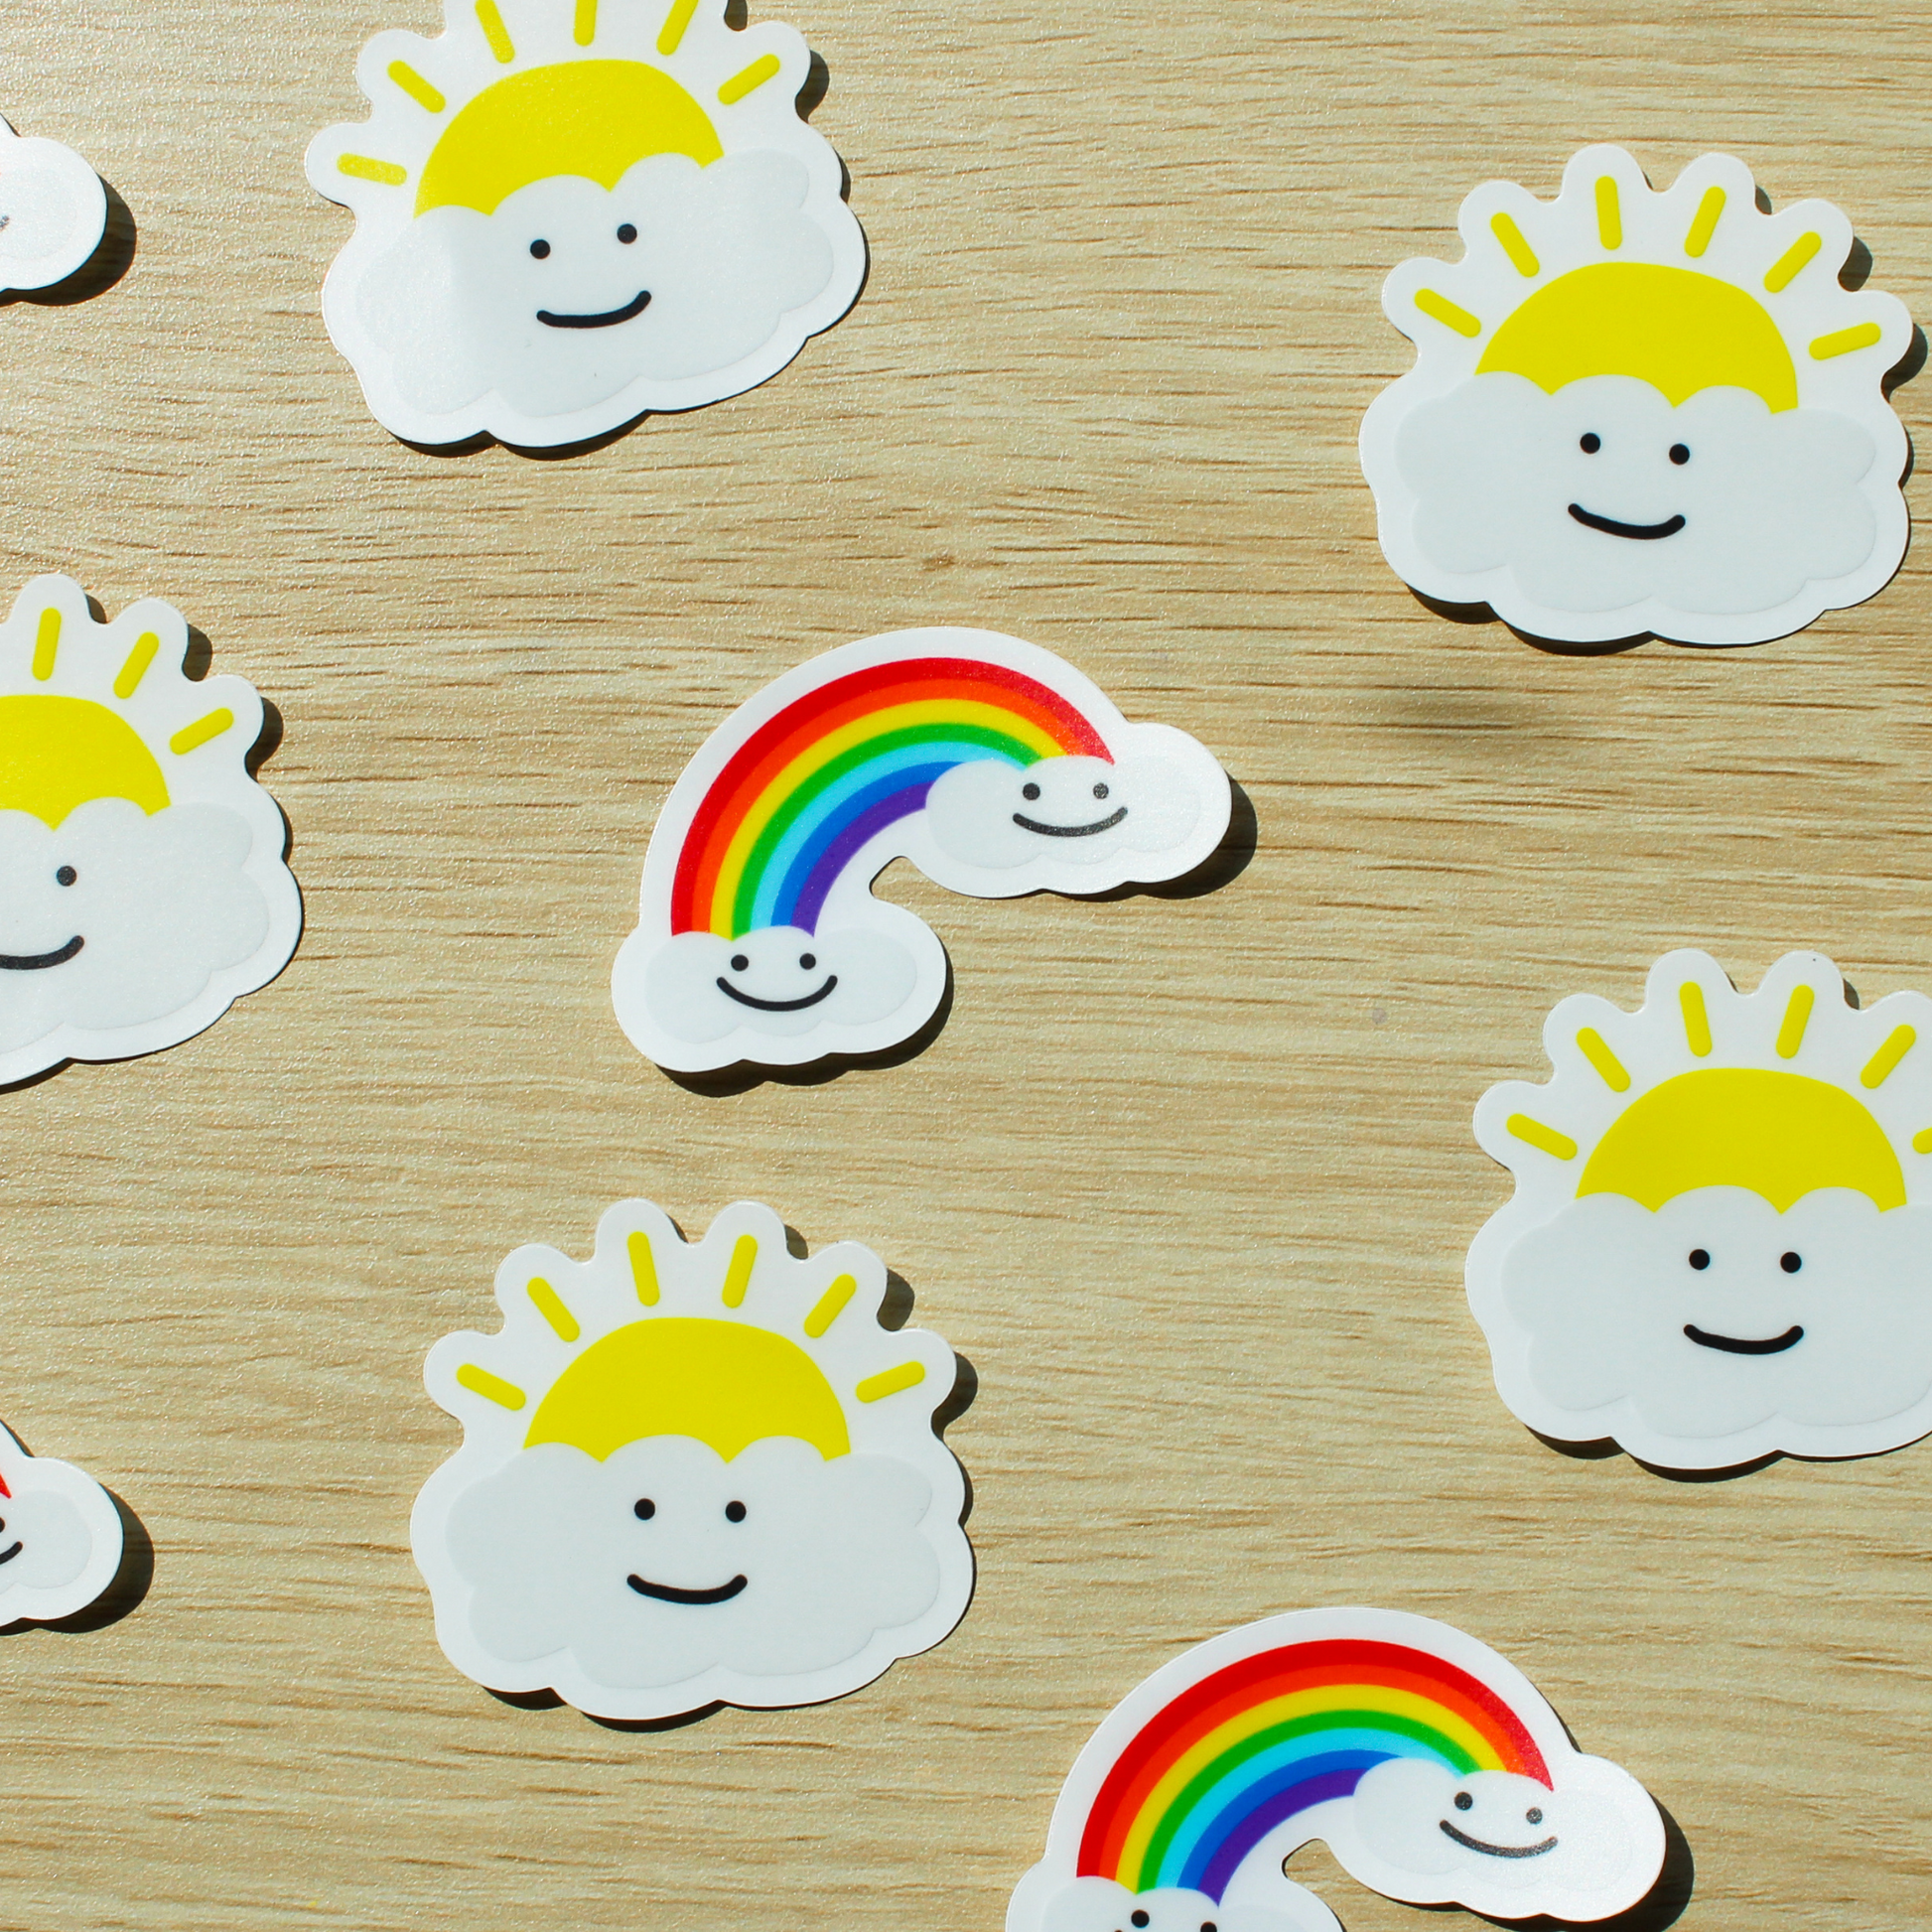 A wooden background with alternating smiling rainbow and smiling sunny cloud stickers.